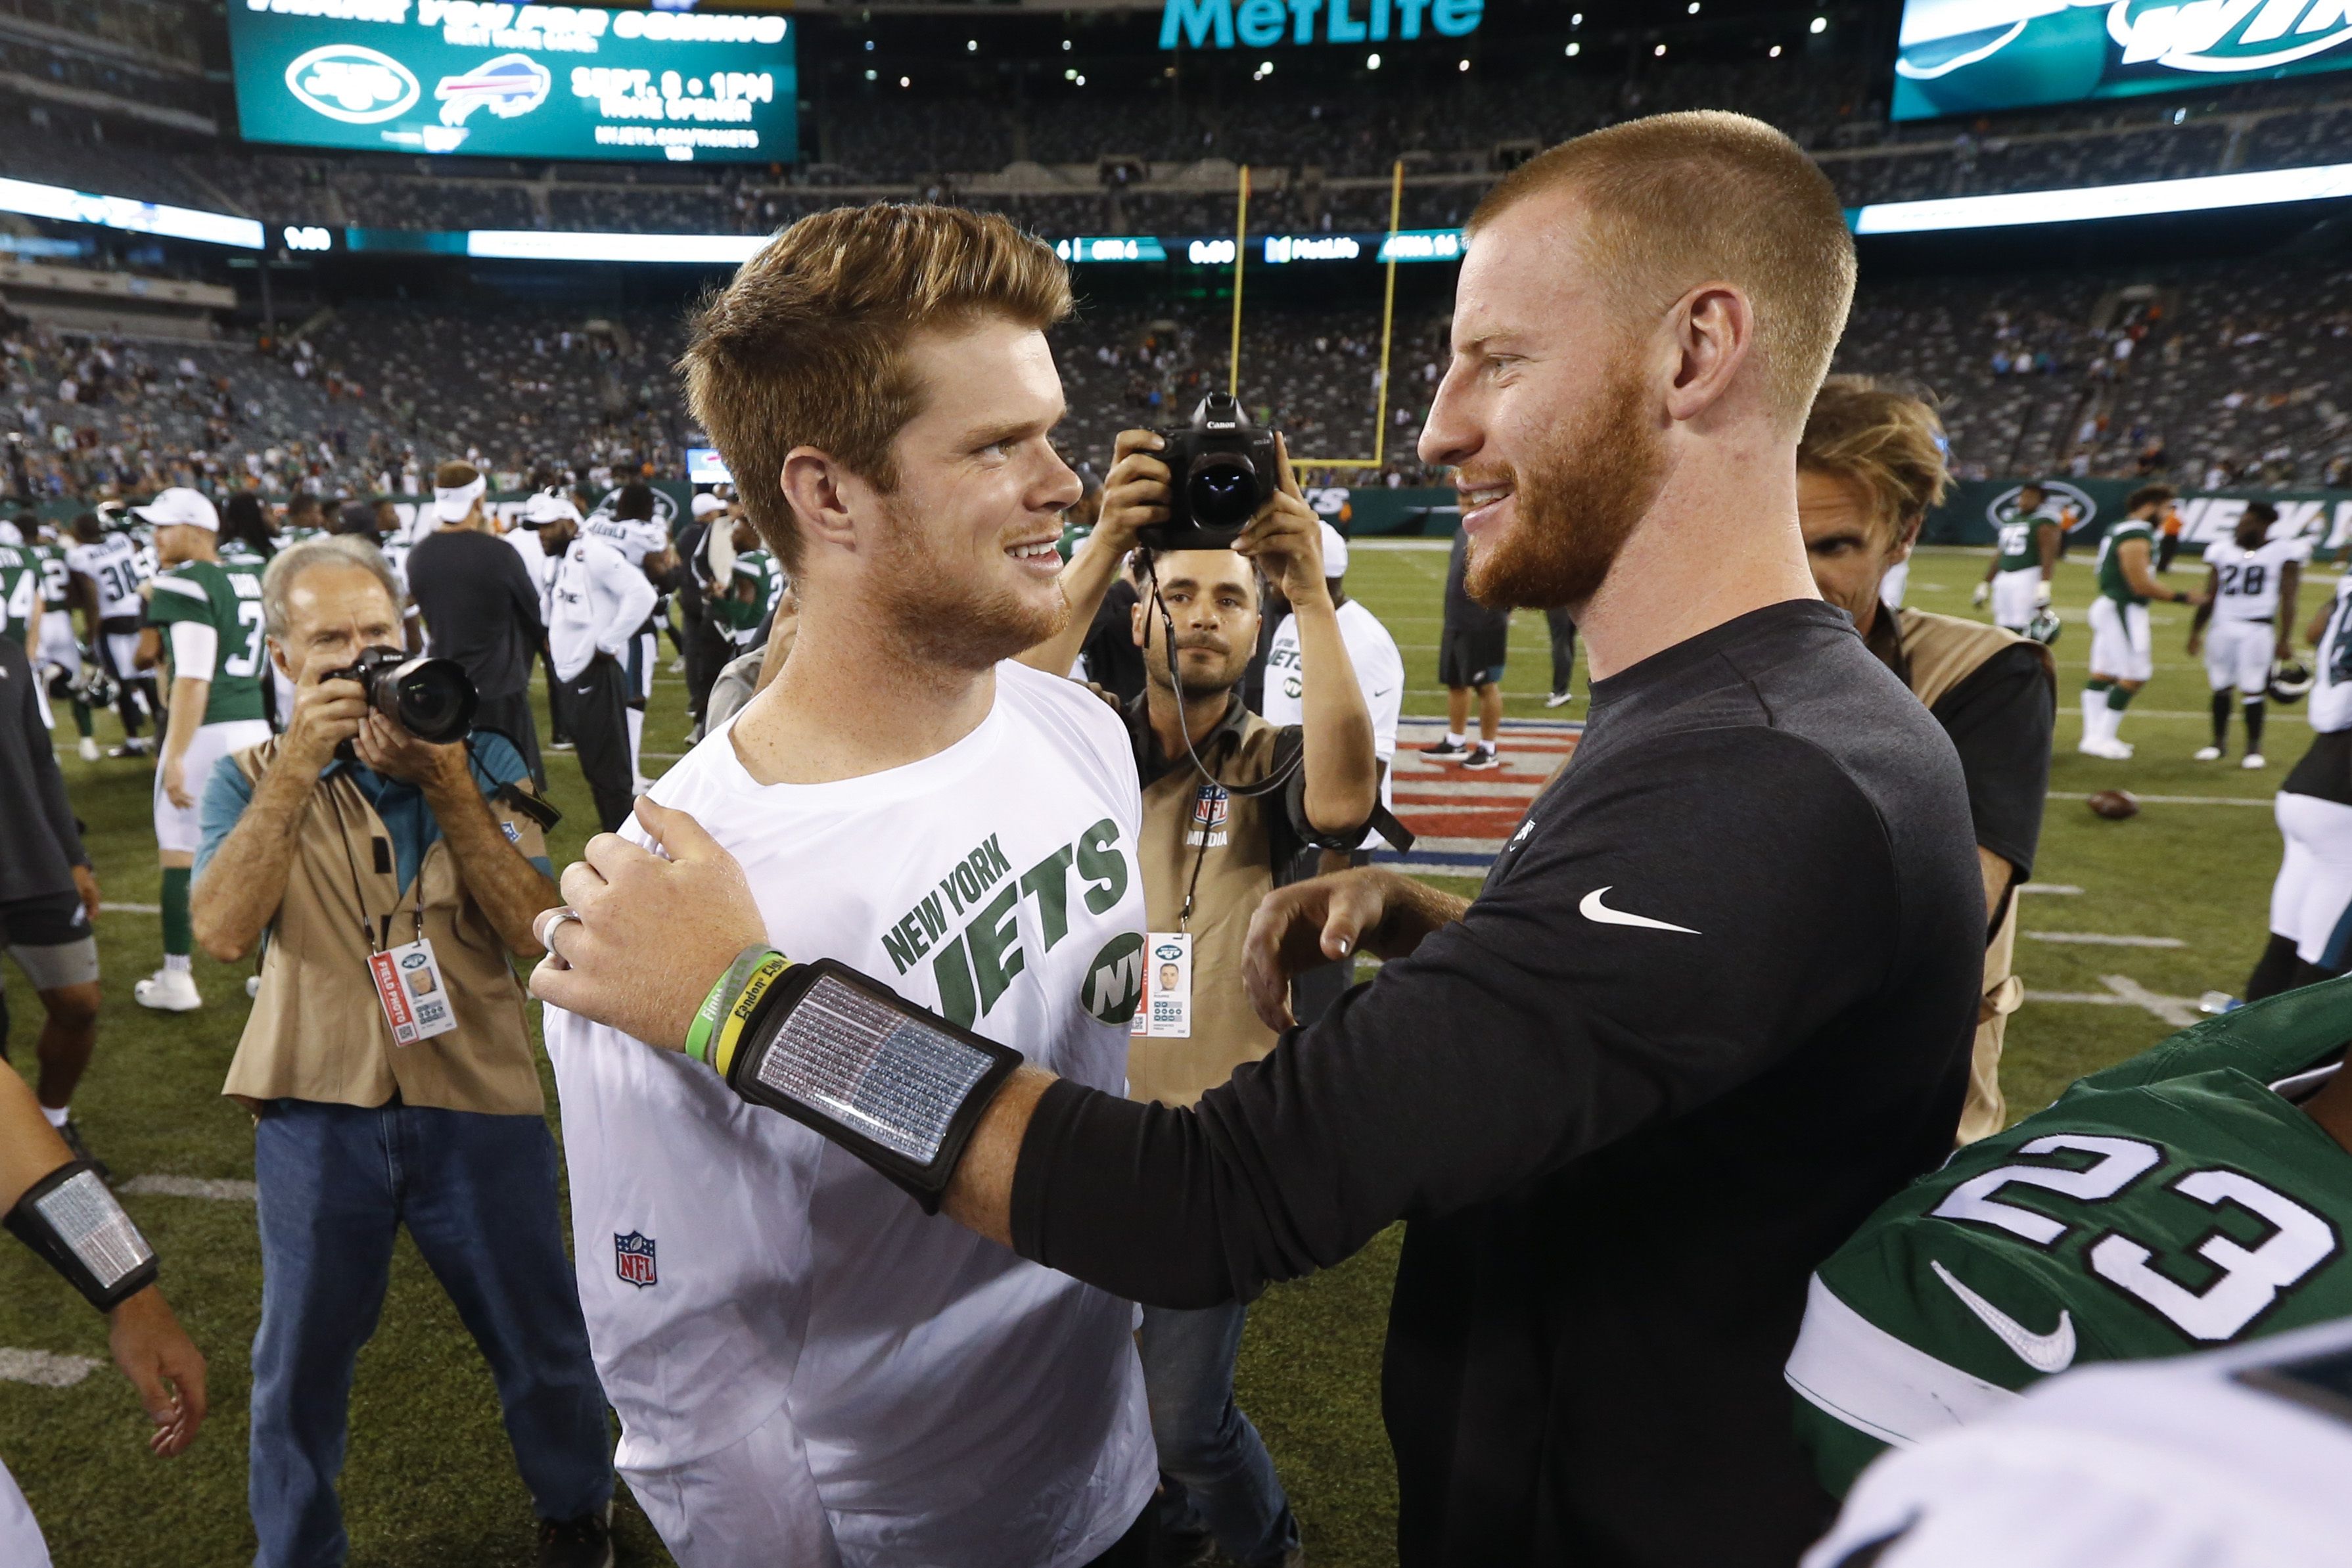 Eagles vs. Jets: Top photos from the preseason opener at The Linc